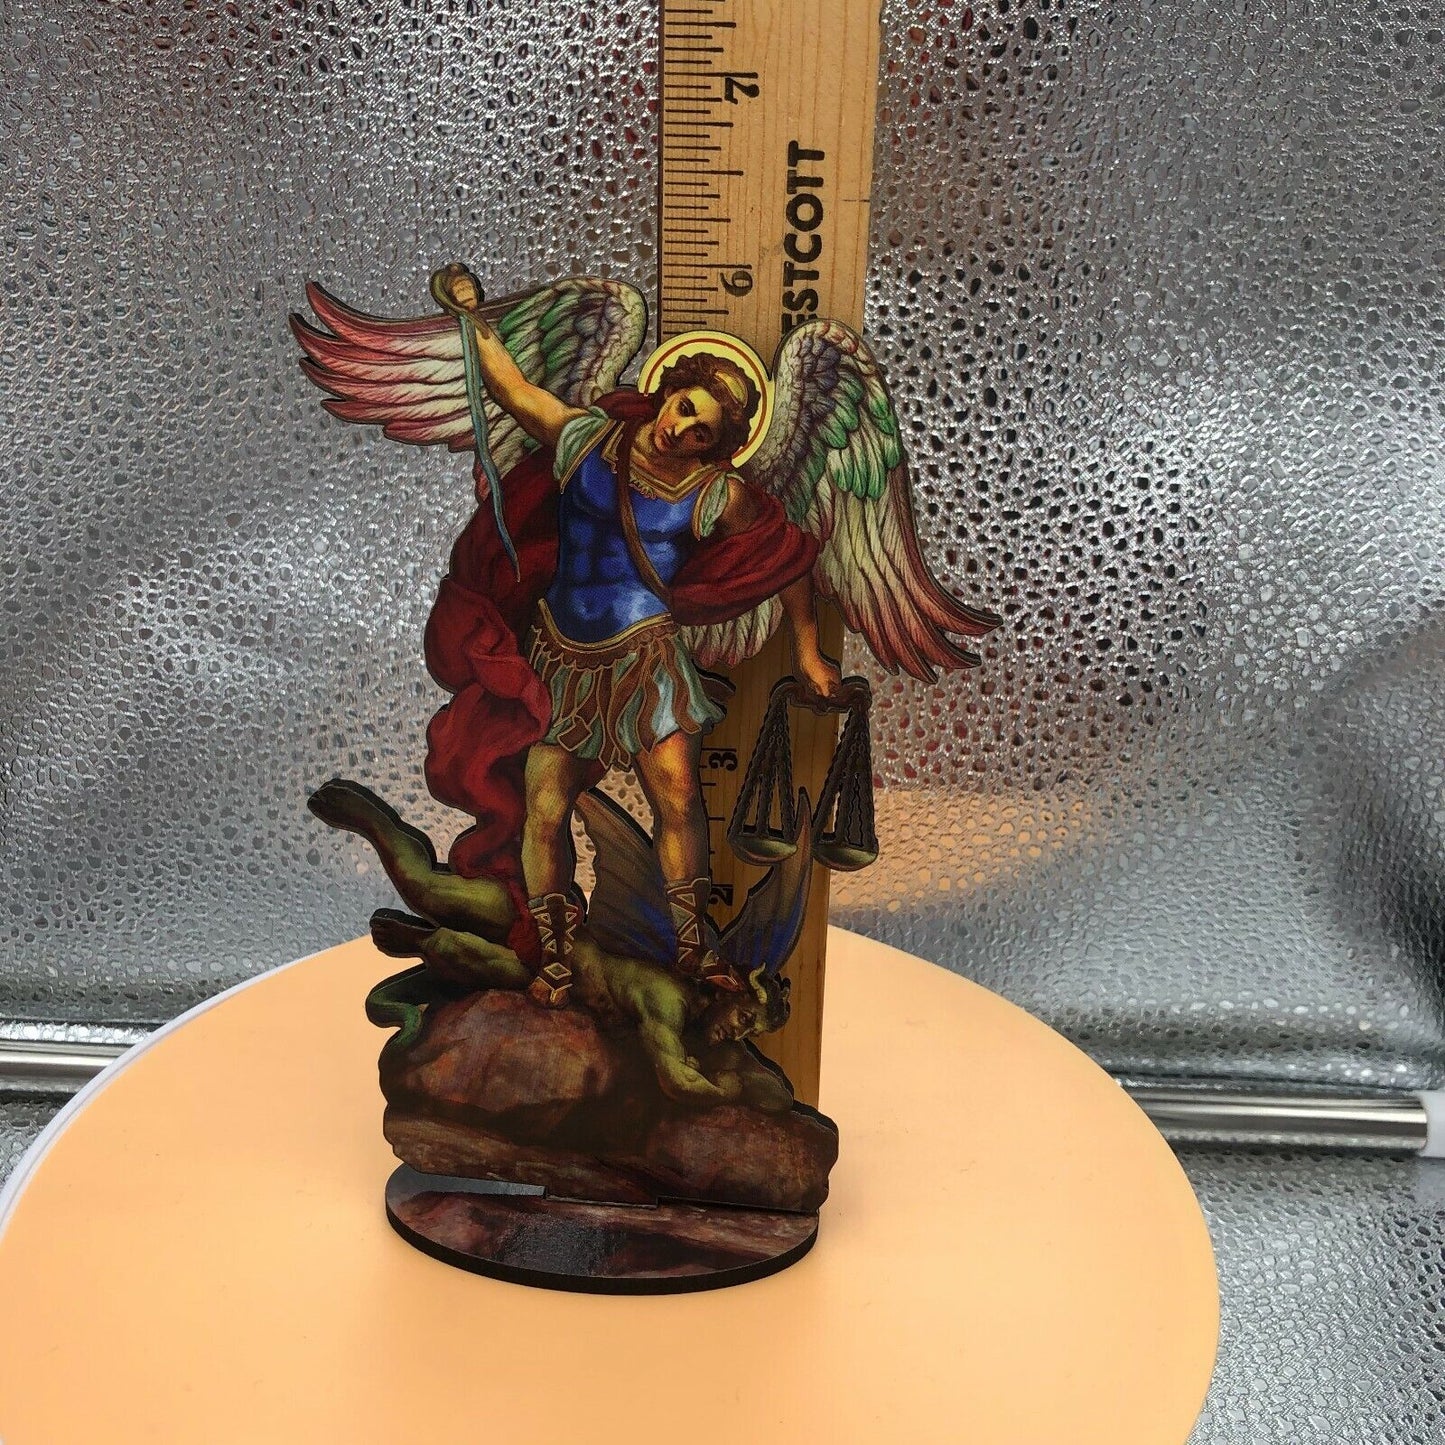 Saint Michael The Archangel 6" Laser Image on Thin Wood Statue, New #93 - Bob and Penny Lord